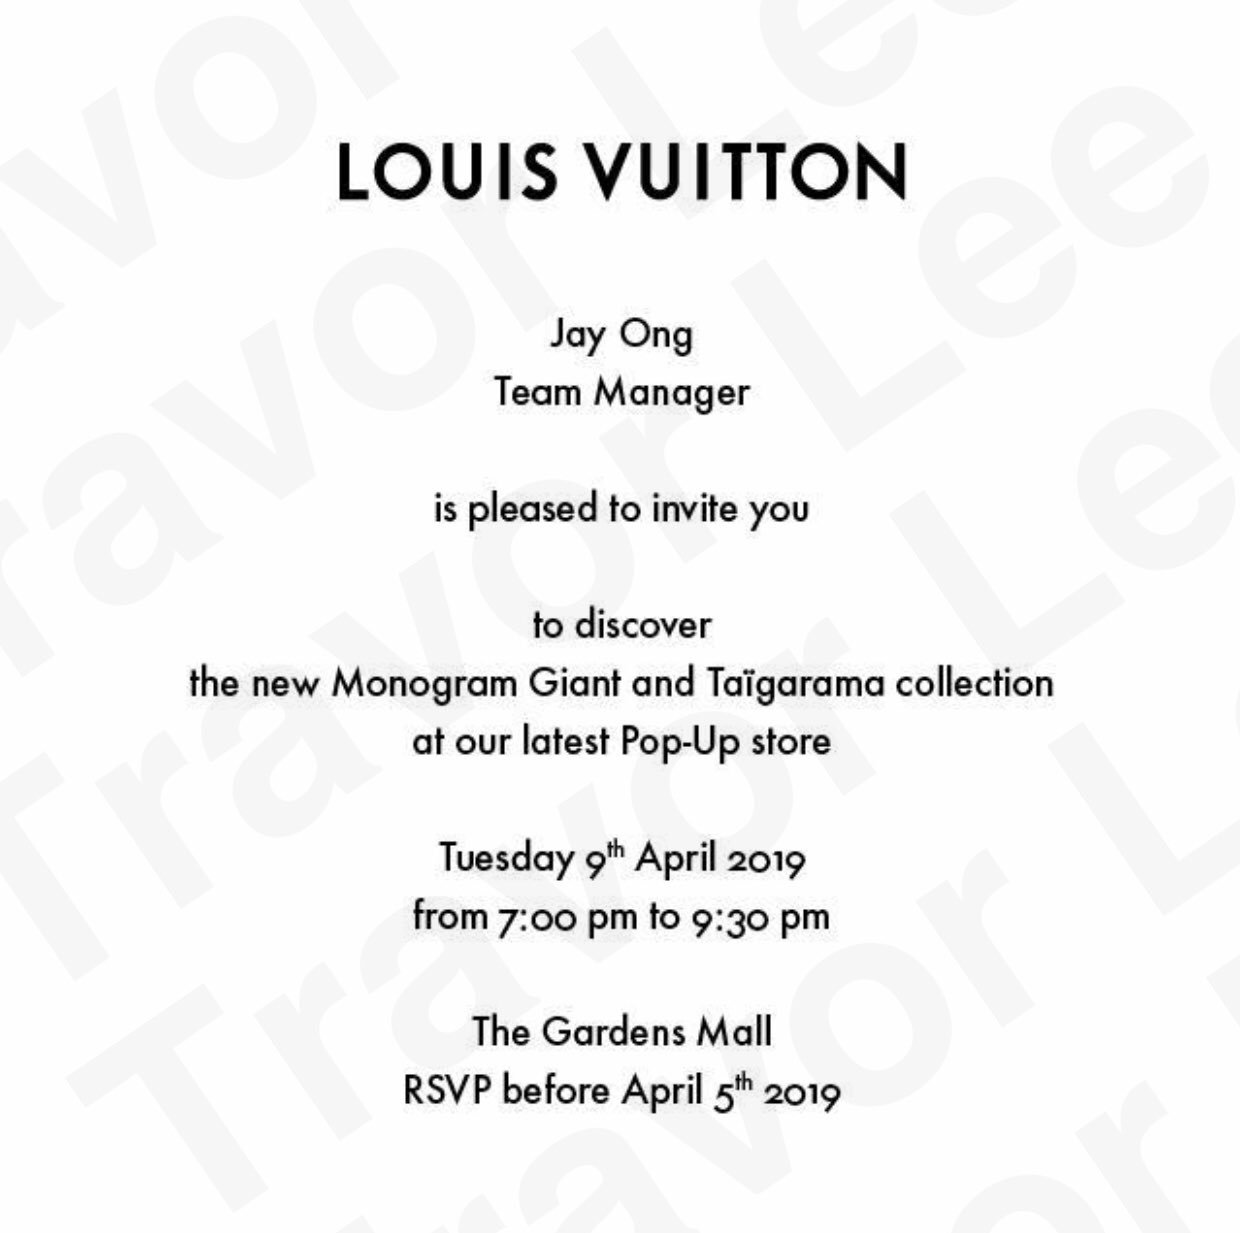 Travor Lee on X: Thanks Louis Vuitton Malaysia for the invite